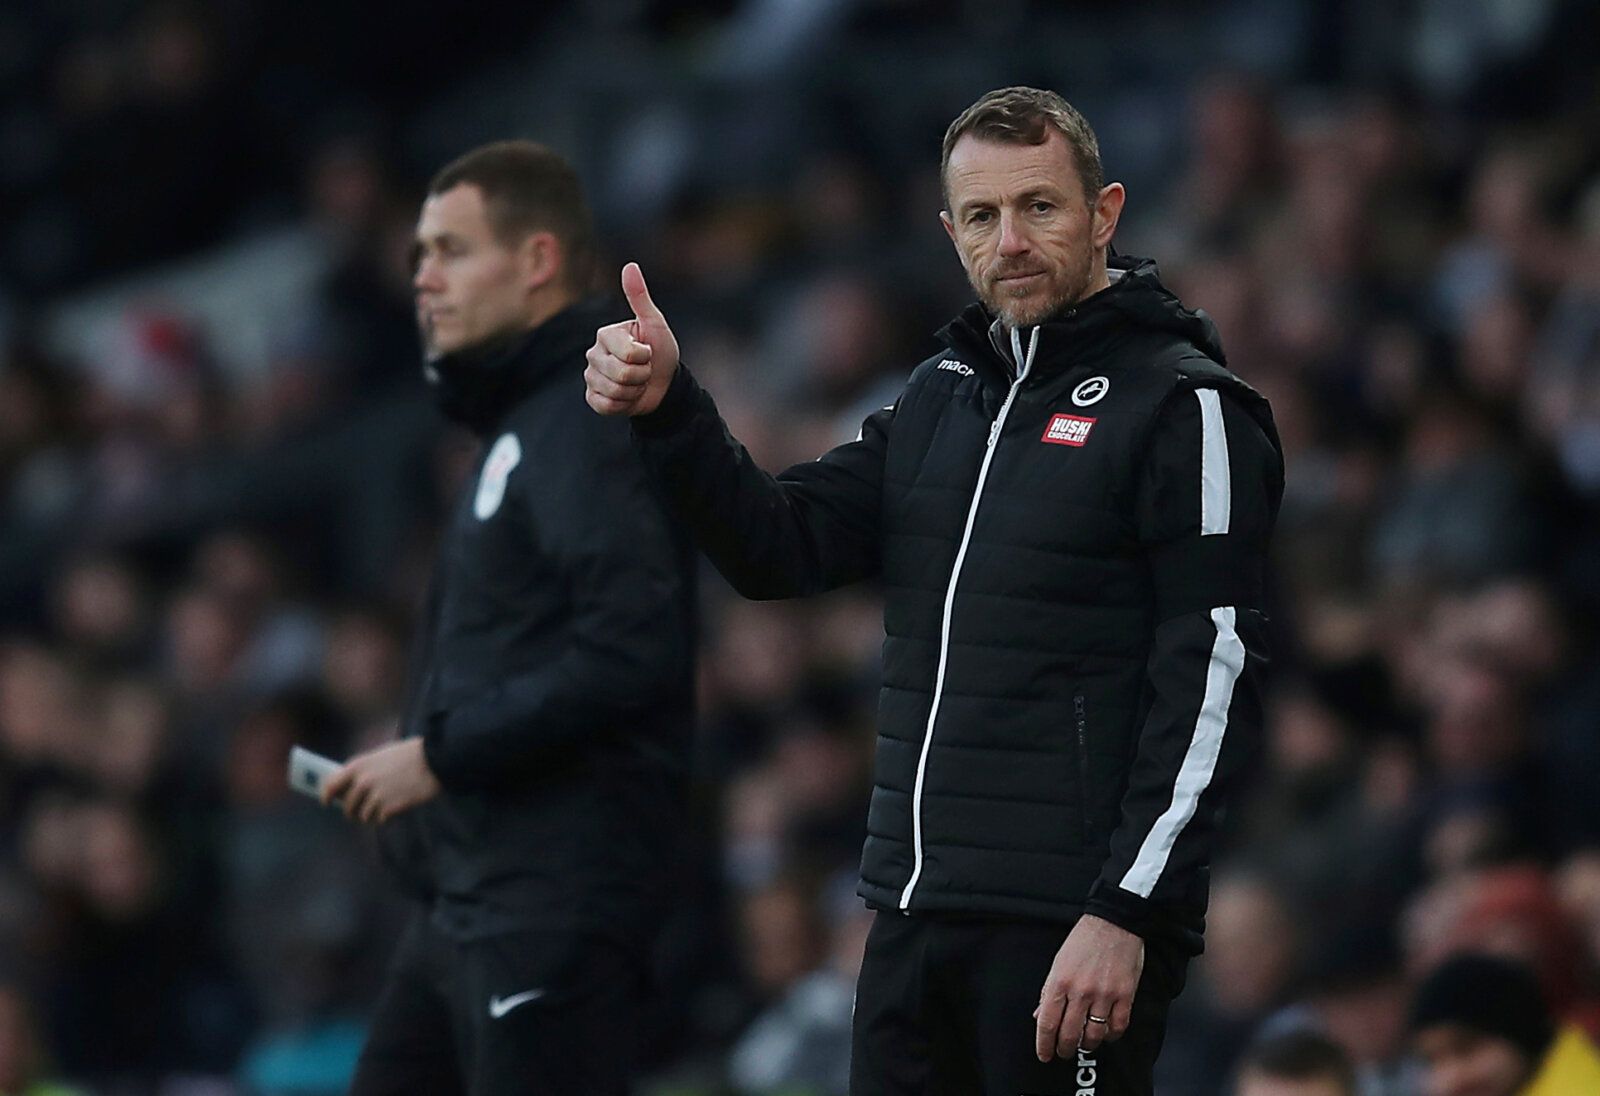 Soccer Football - Championship - Derby County v Millwall - Pride Park, Derby, Britain - December 14, 2019   Millwall's manager Gary Rowett reacts   Action Images/John Clifton    EDITORIAL USE ONLY. No use with unauthorized audio, video, data, fixture lists, club/league logos or 